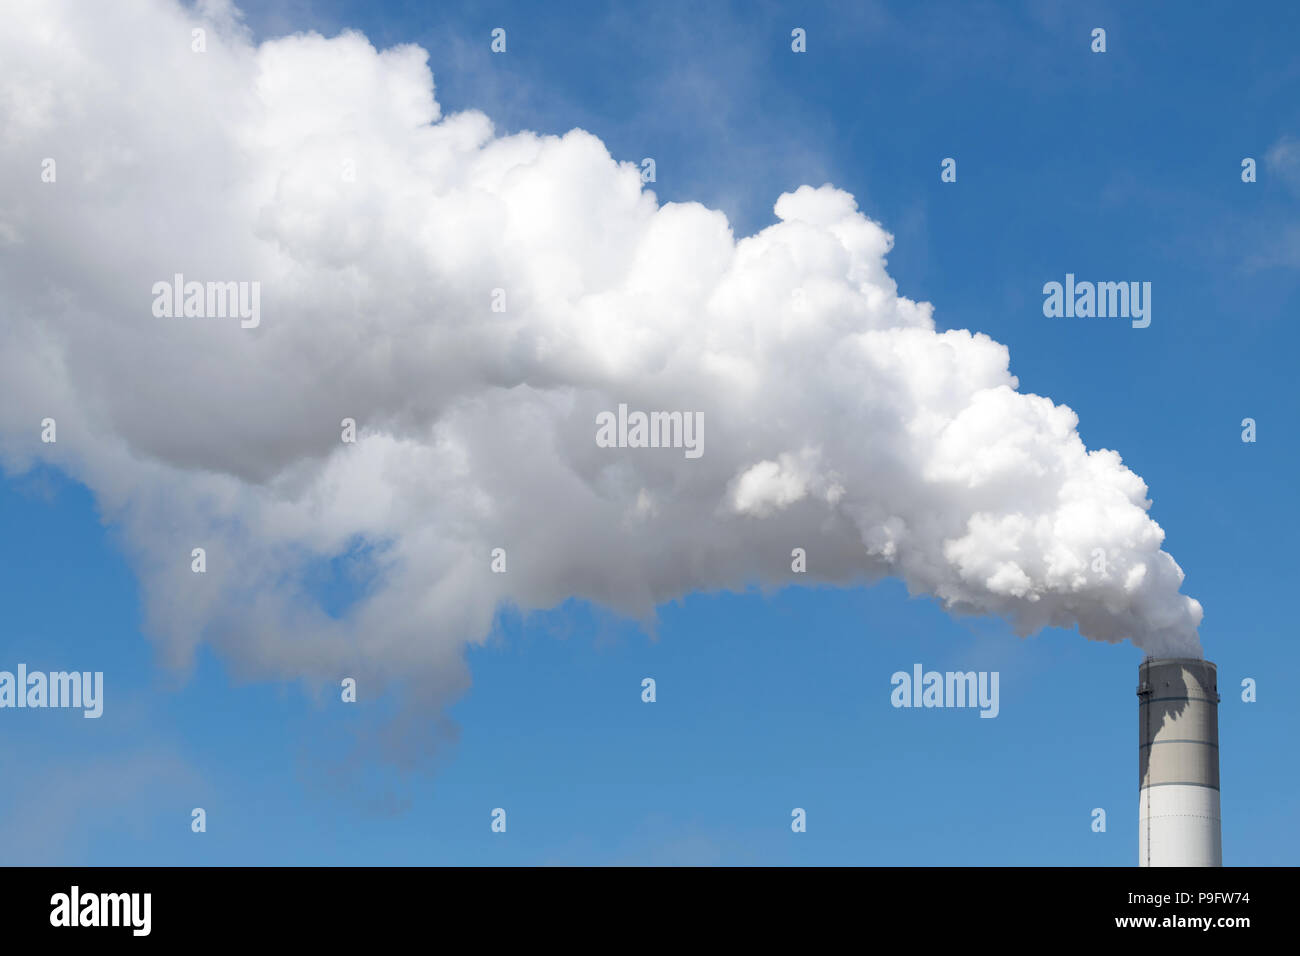 smoking chimney of a coal-fired power plant Stock Photo